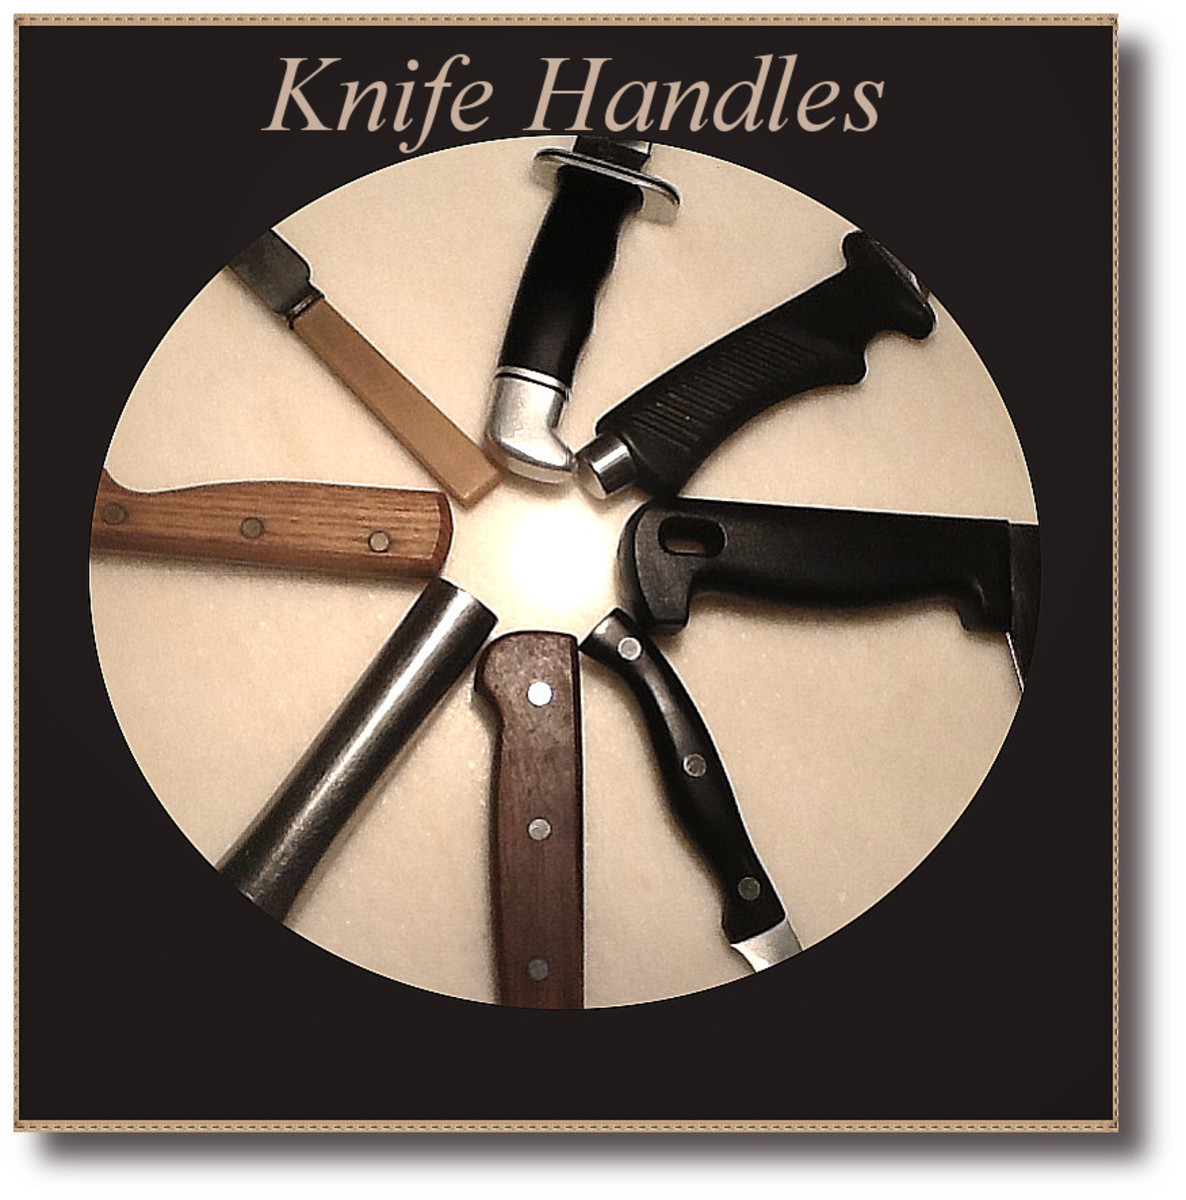 Finding the Right Knife Handle Material for You